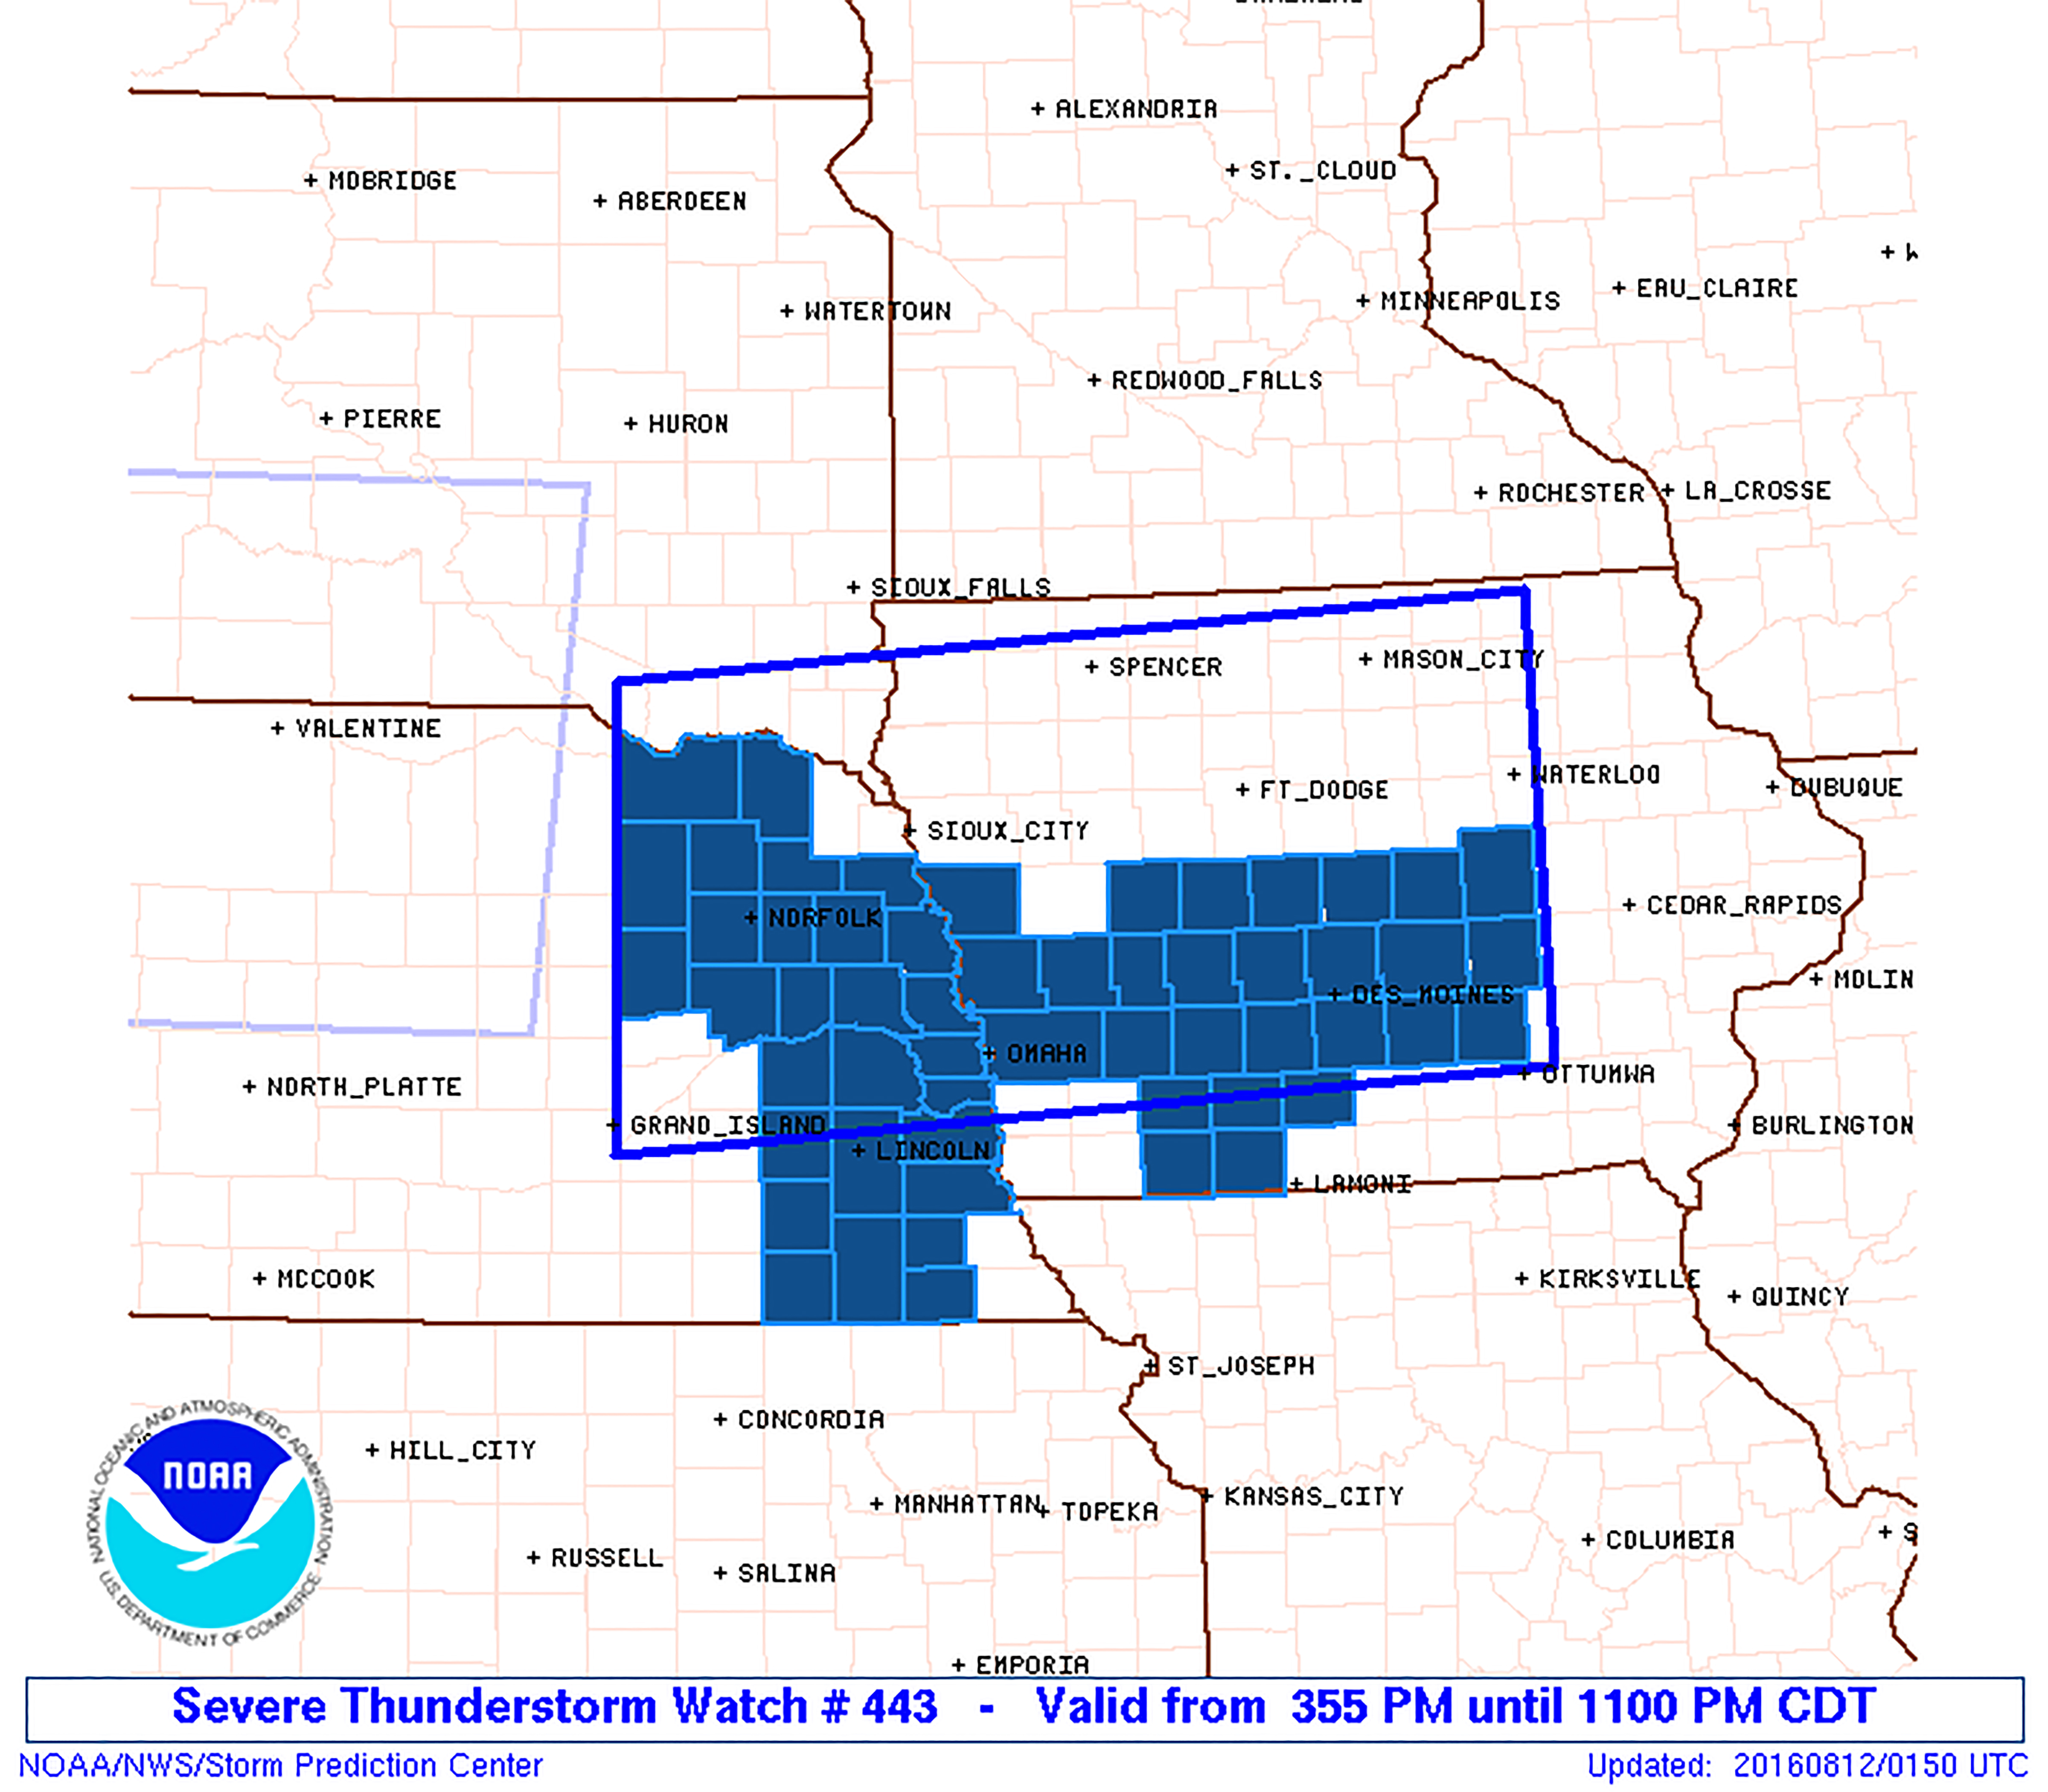 It S Time To Stop Issuing Tornado And Severe Thunderstorm Watch Boxes Meteorologist Scott Dimmich